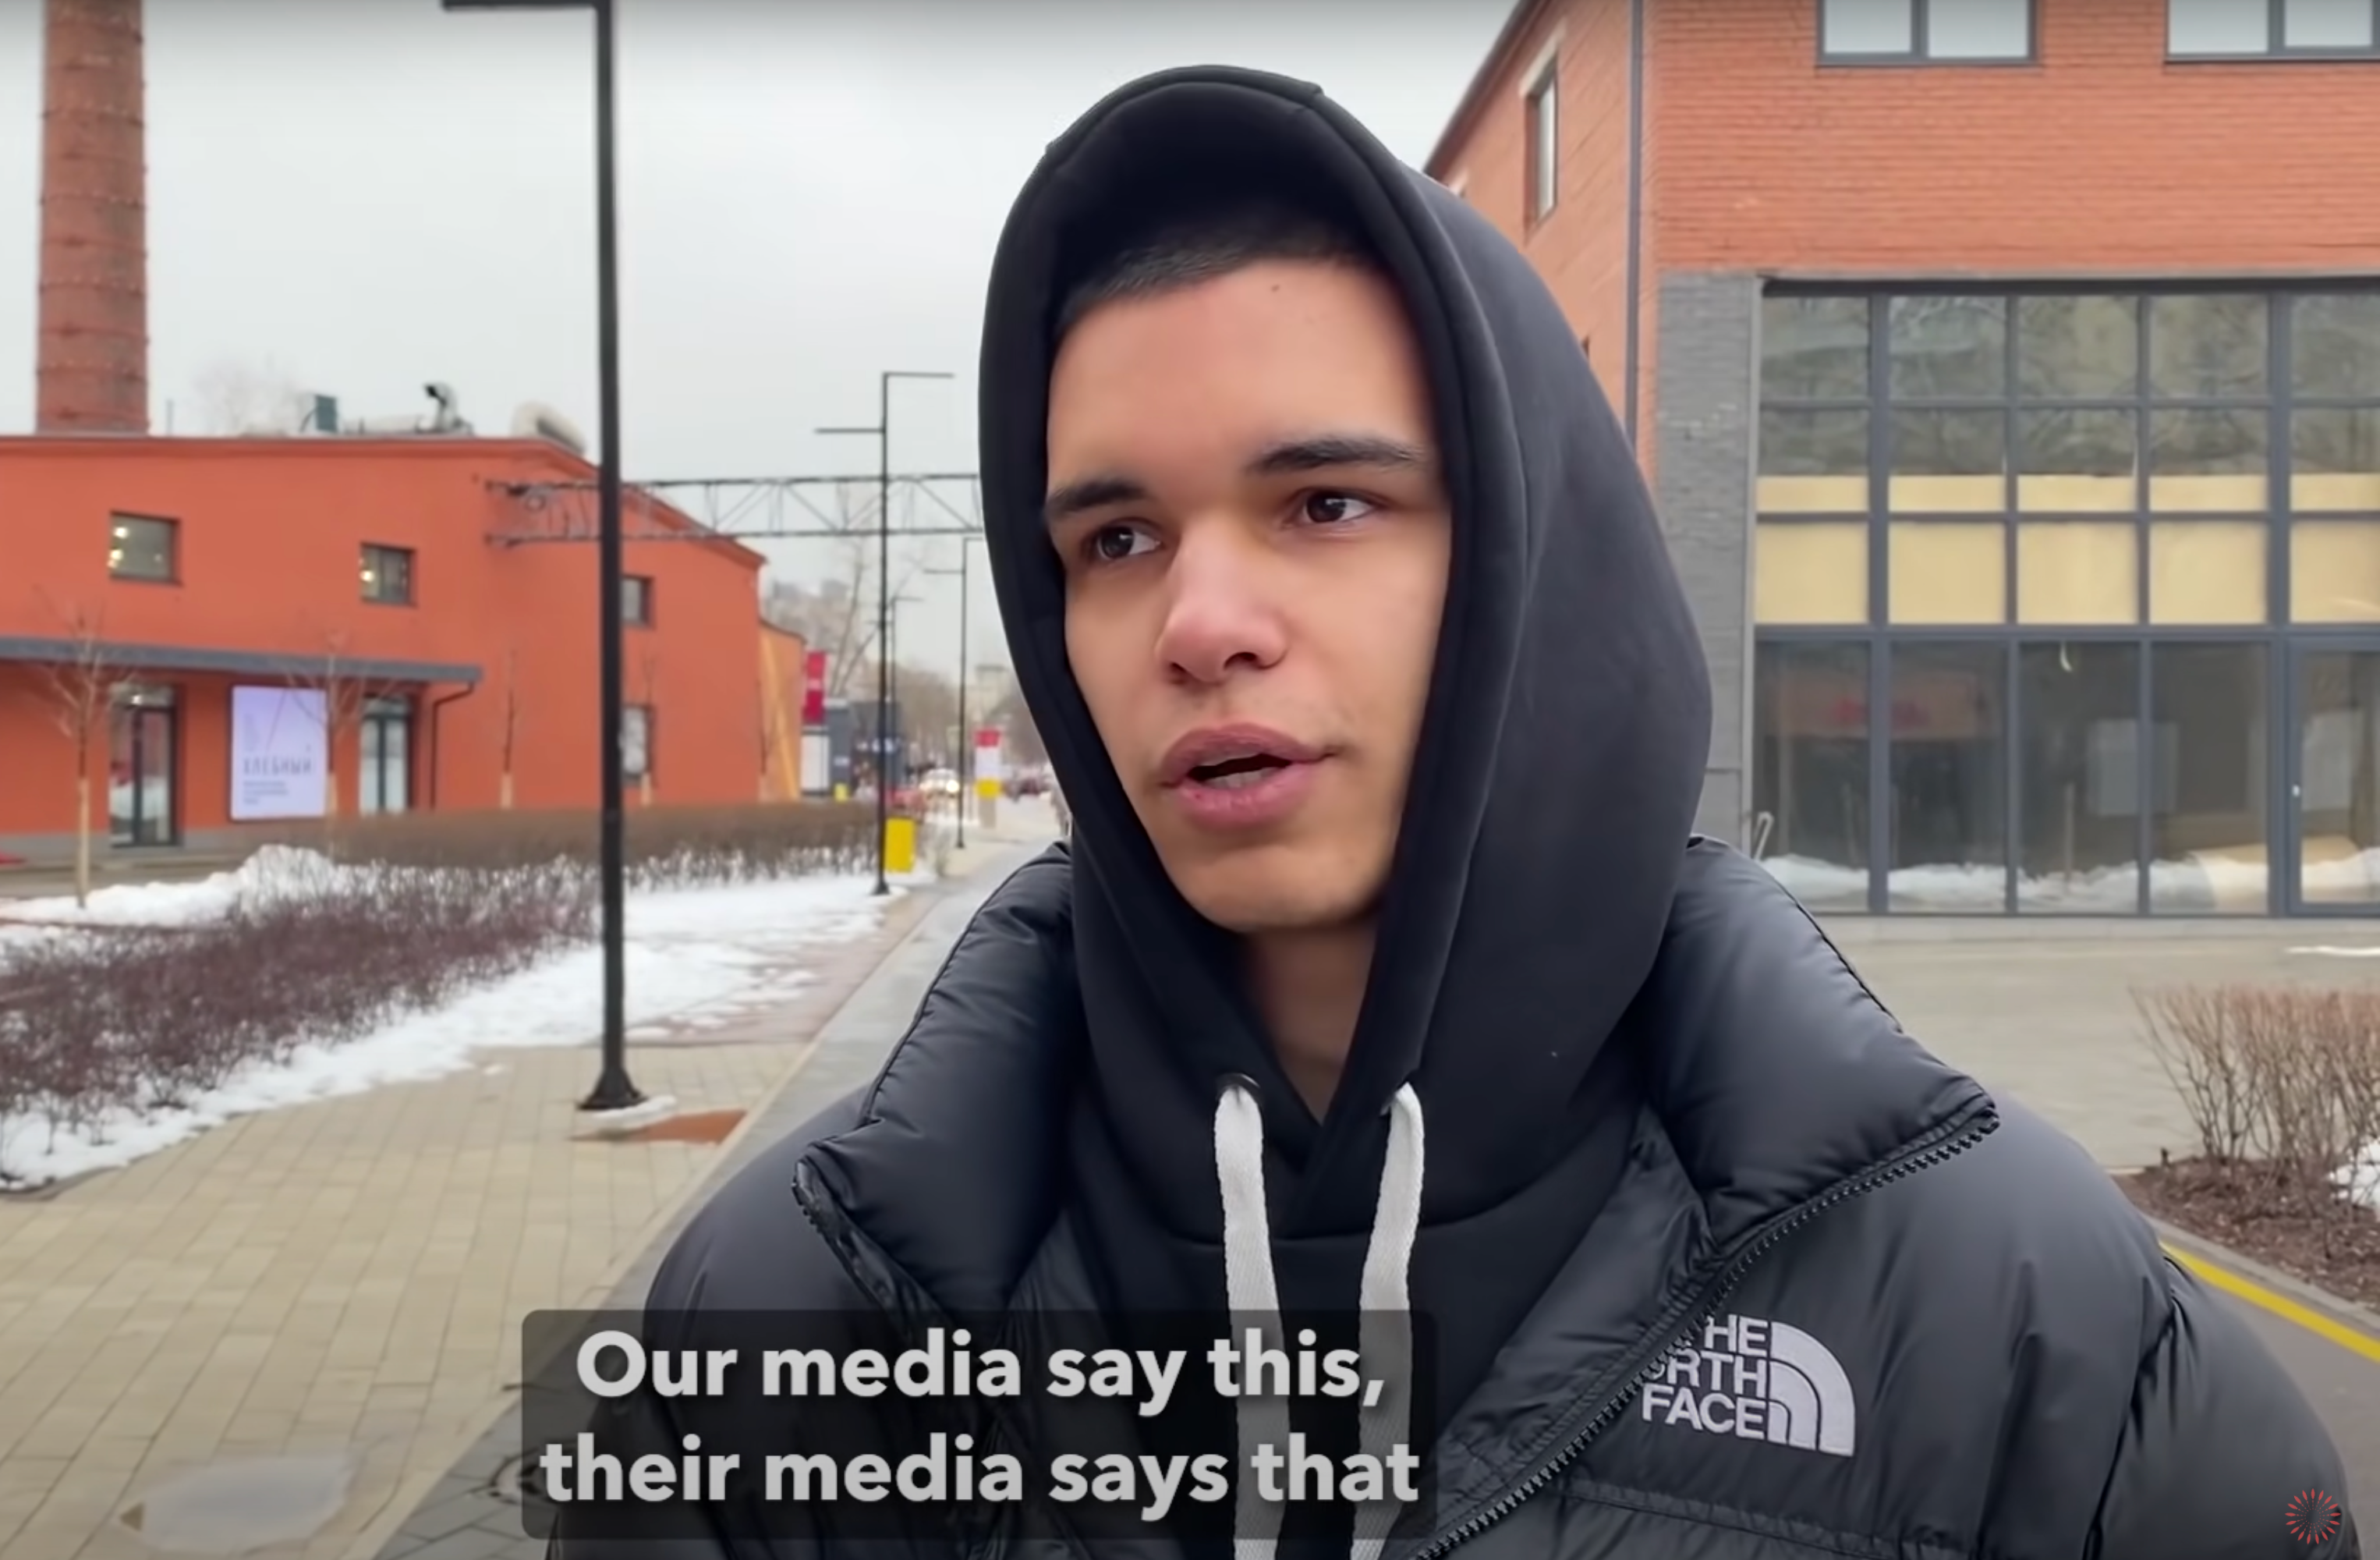 A young man in Moscow says he doesn’t know who to believe regarding Russia's war in Ukraine